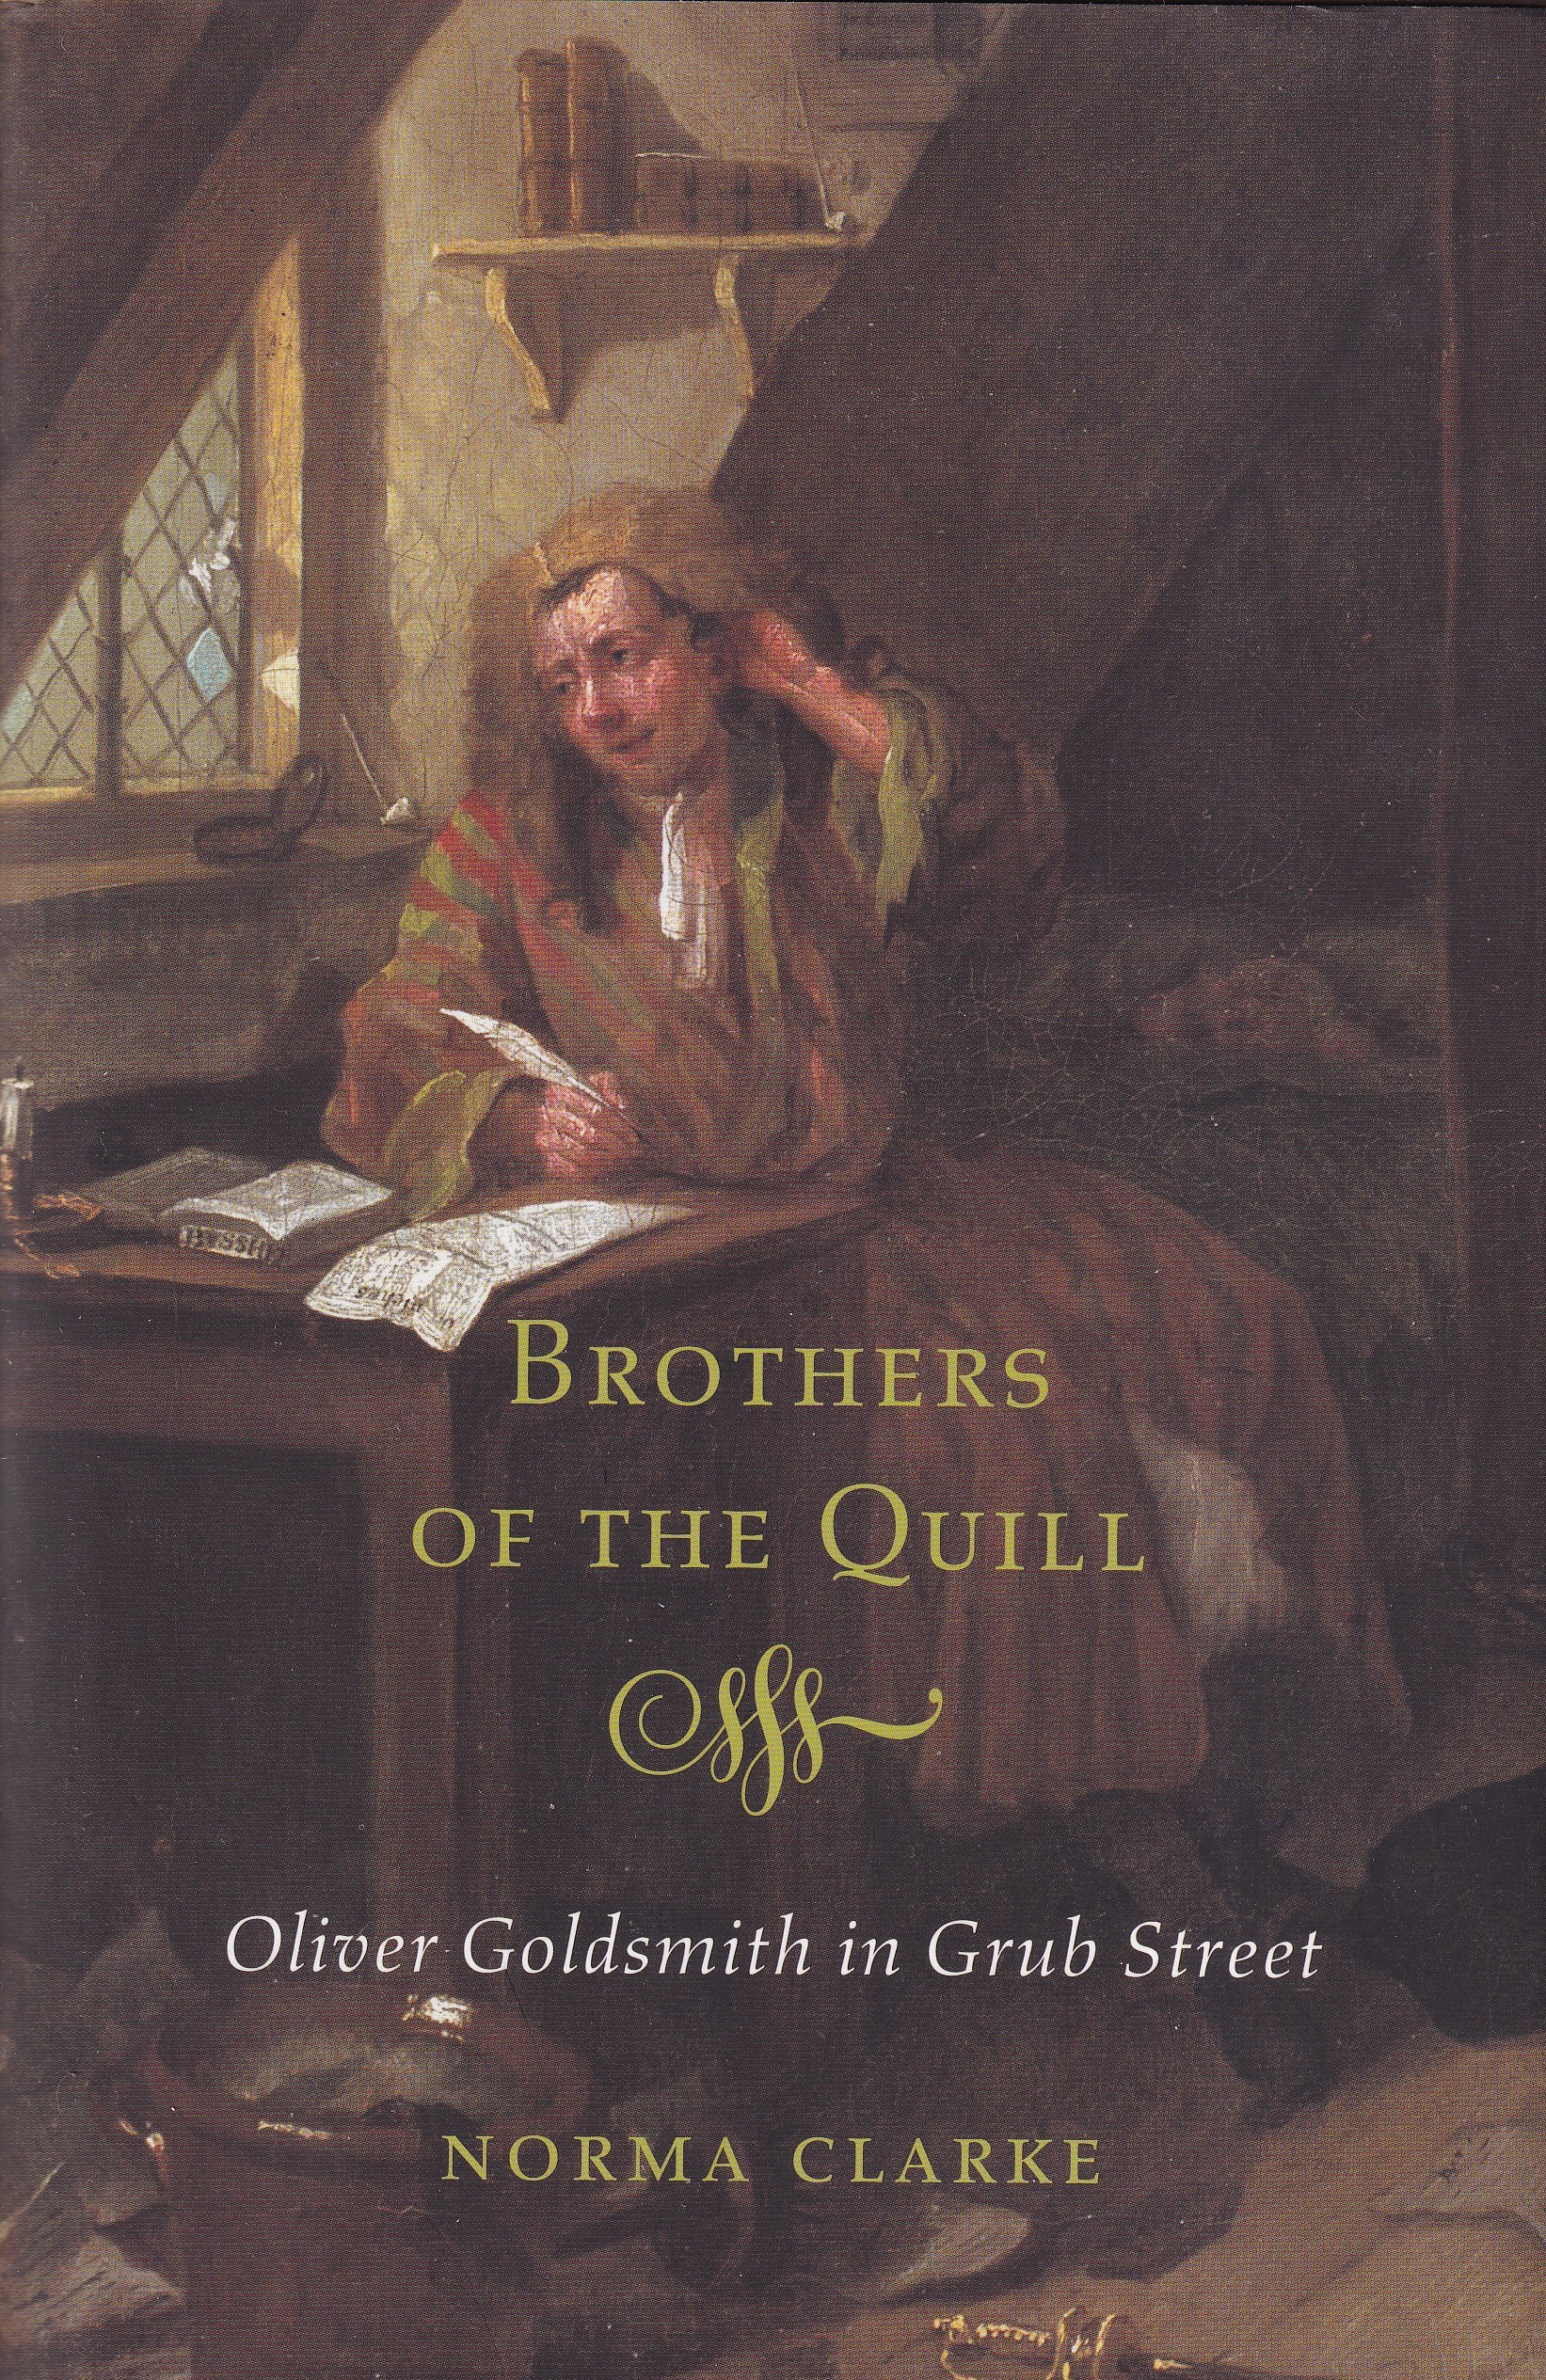 Brothers of the Quill: Oliver Goldsmith in Grub Street by Norma Clarke